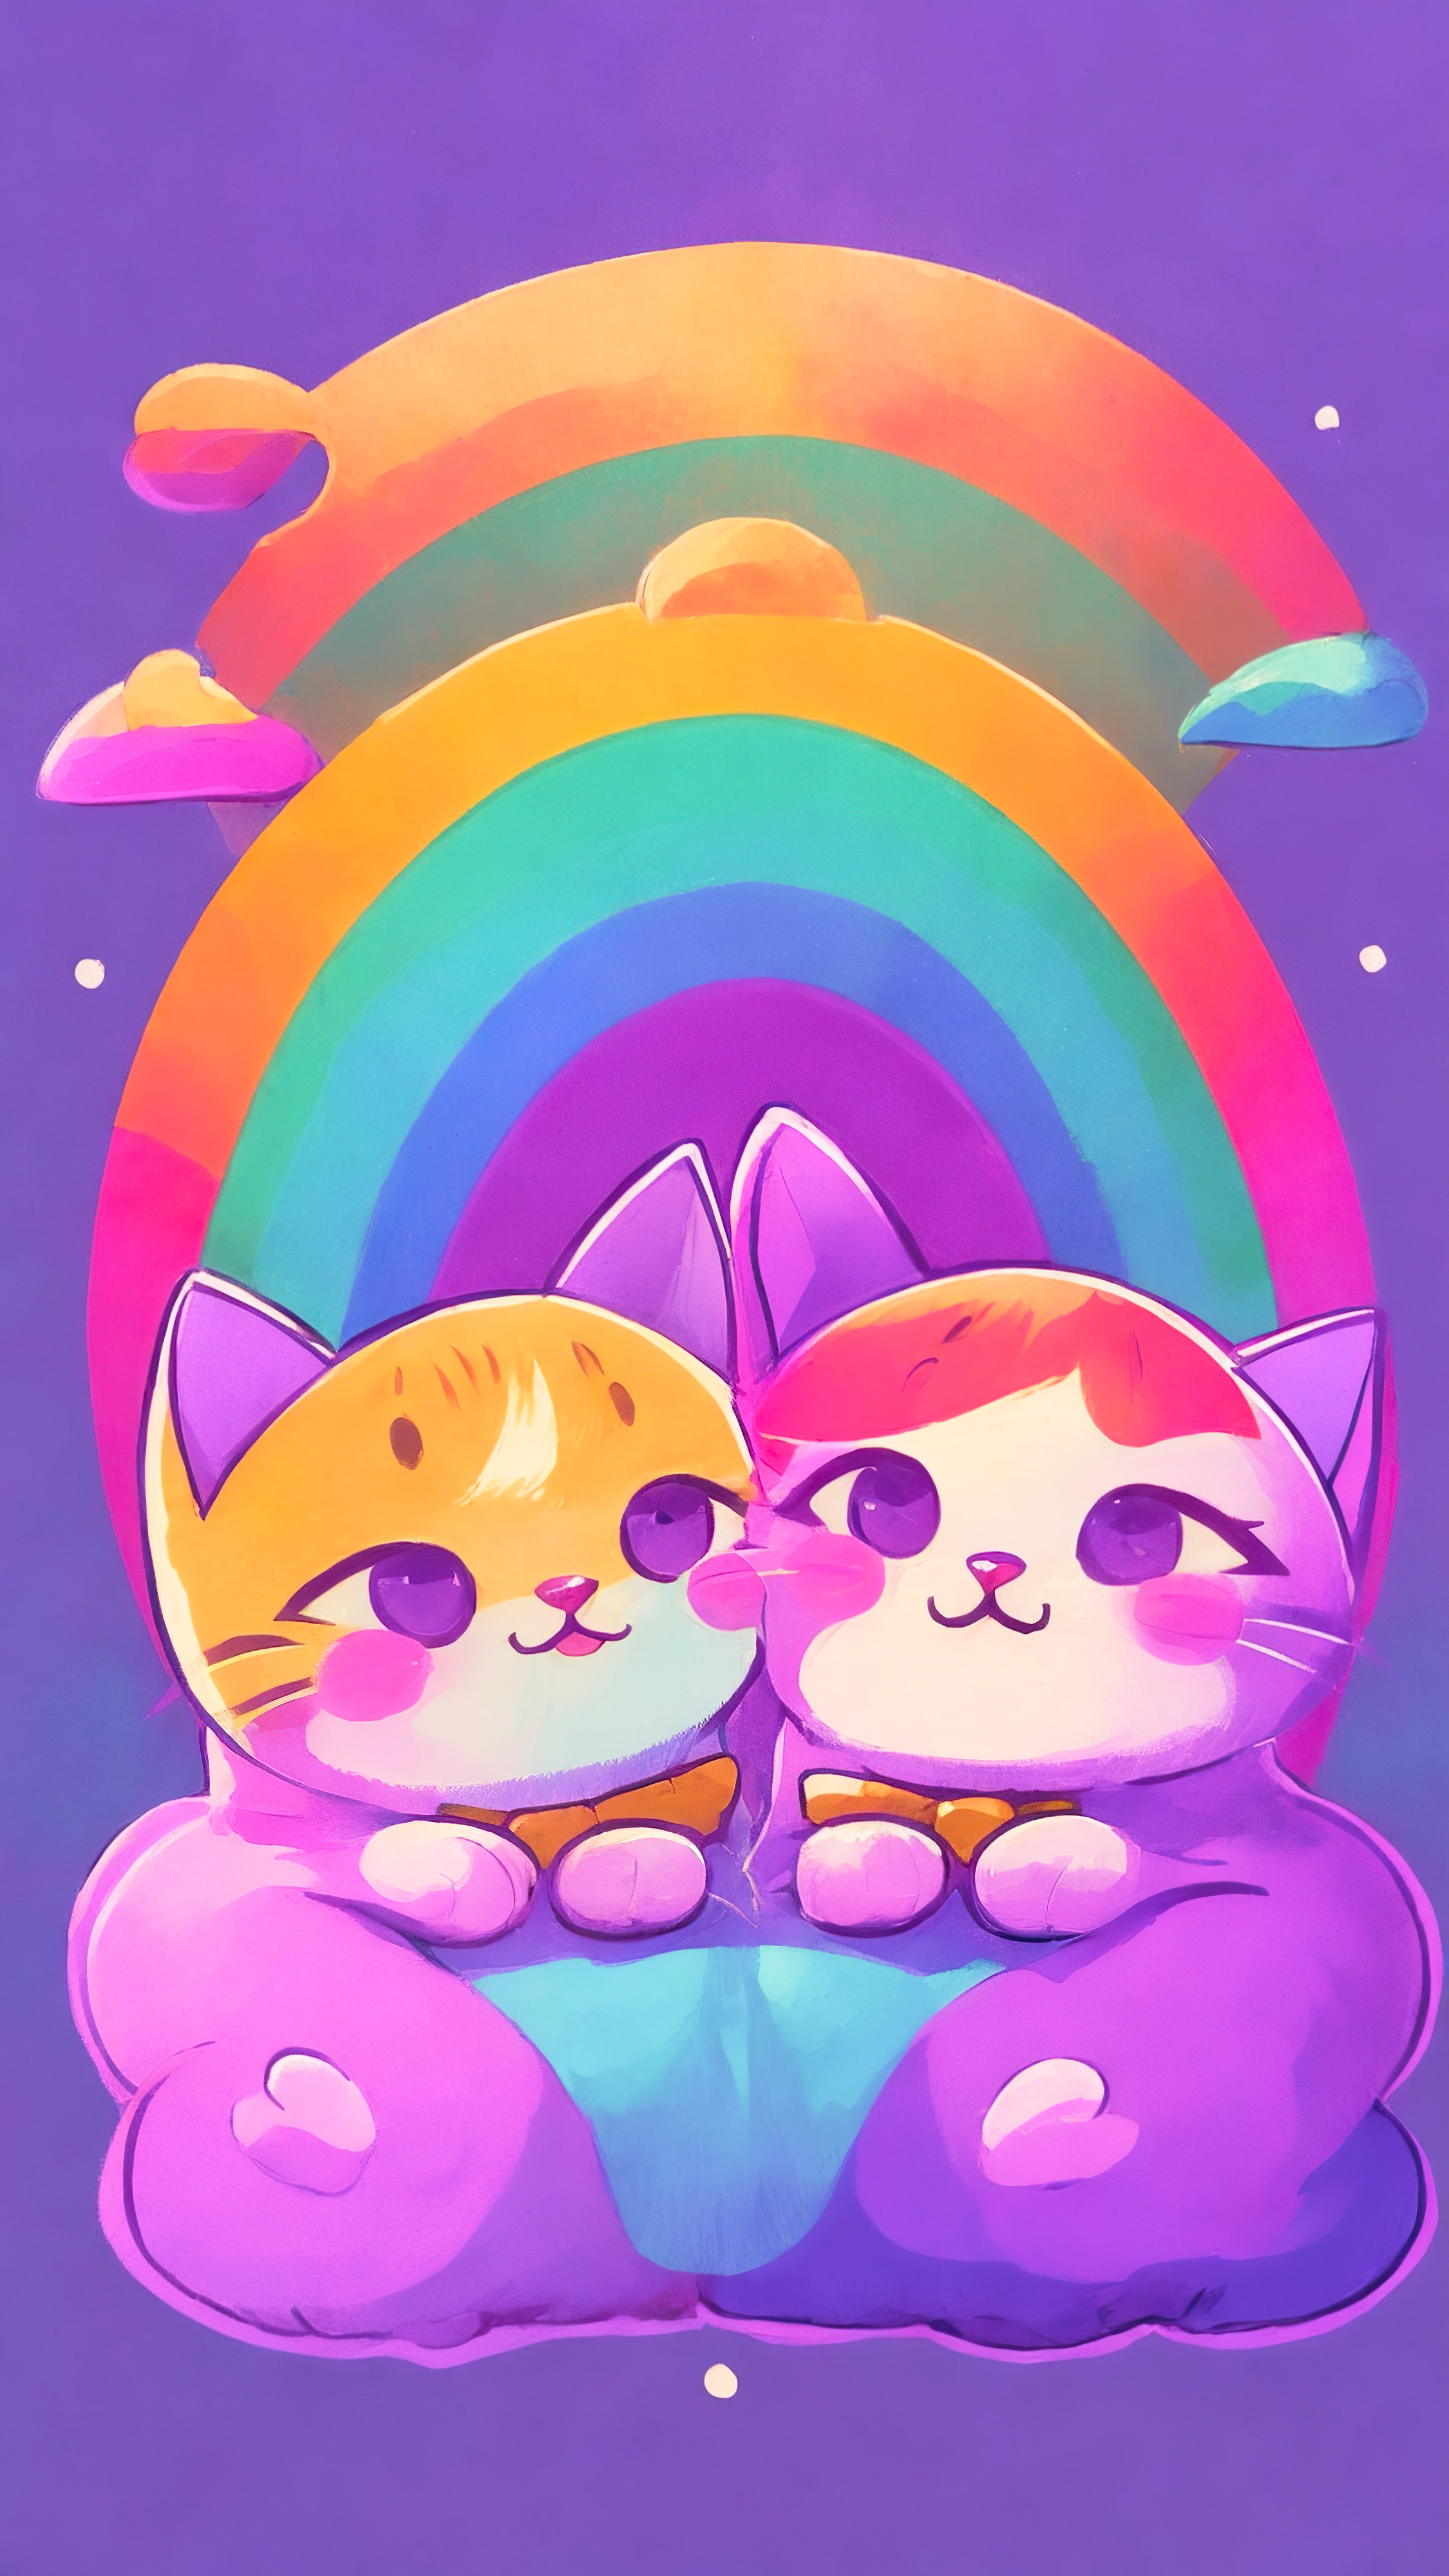 Admire the elegance of our cute cats wallpaper for iPhone, featuring a kawaii cartoon-style rainbow on a purple background that will make your device stand out.